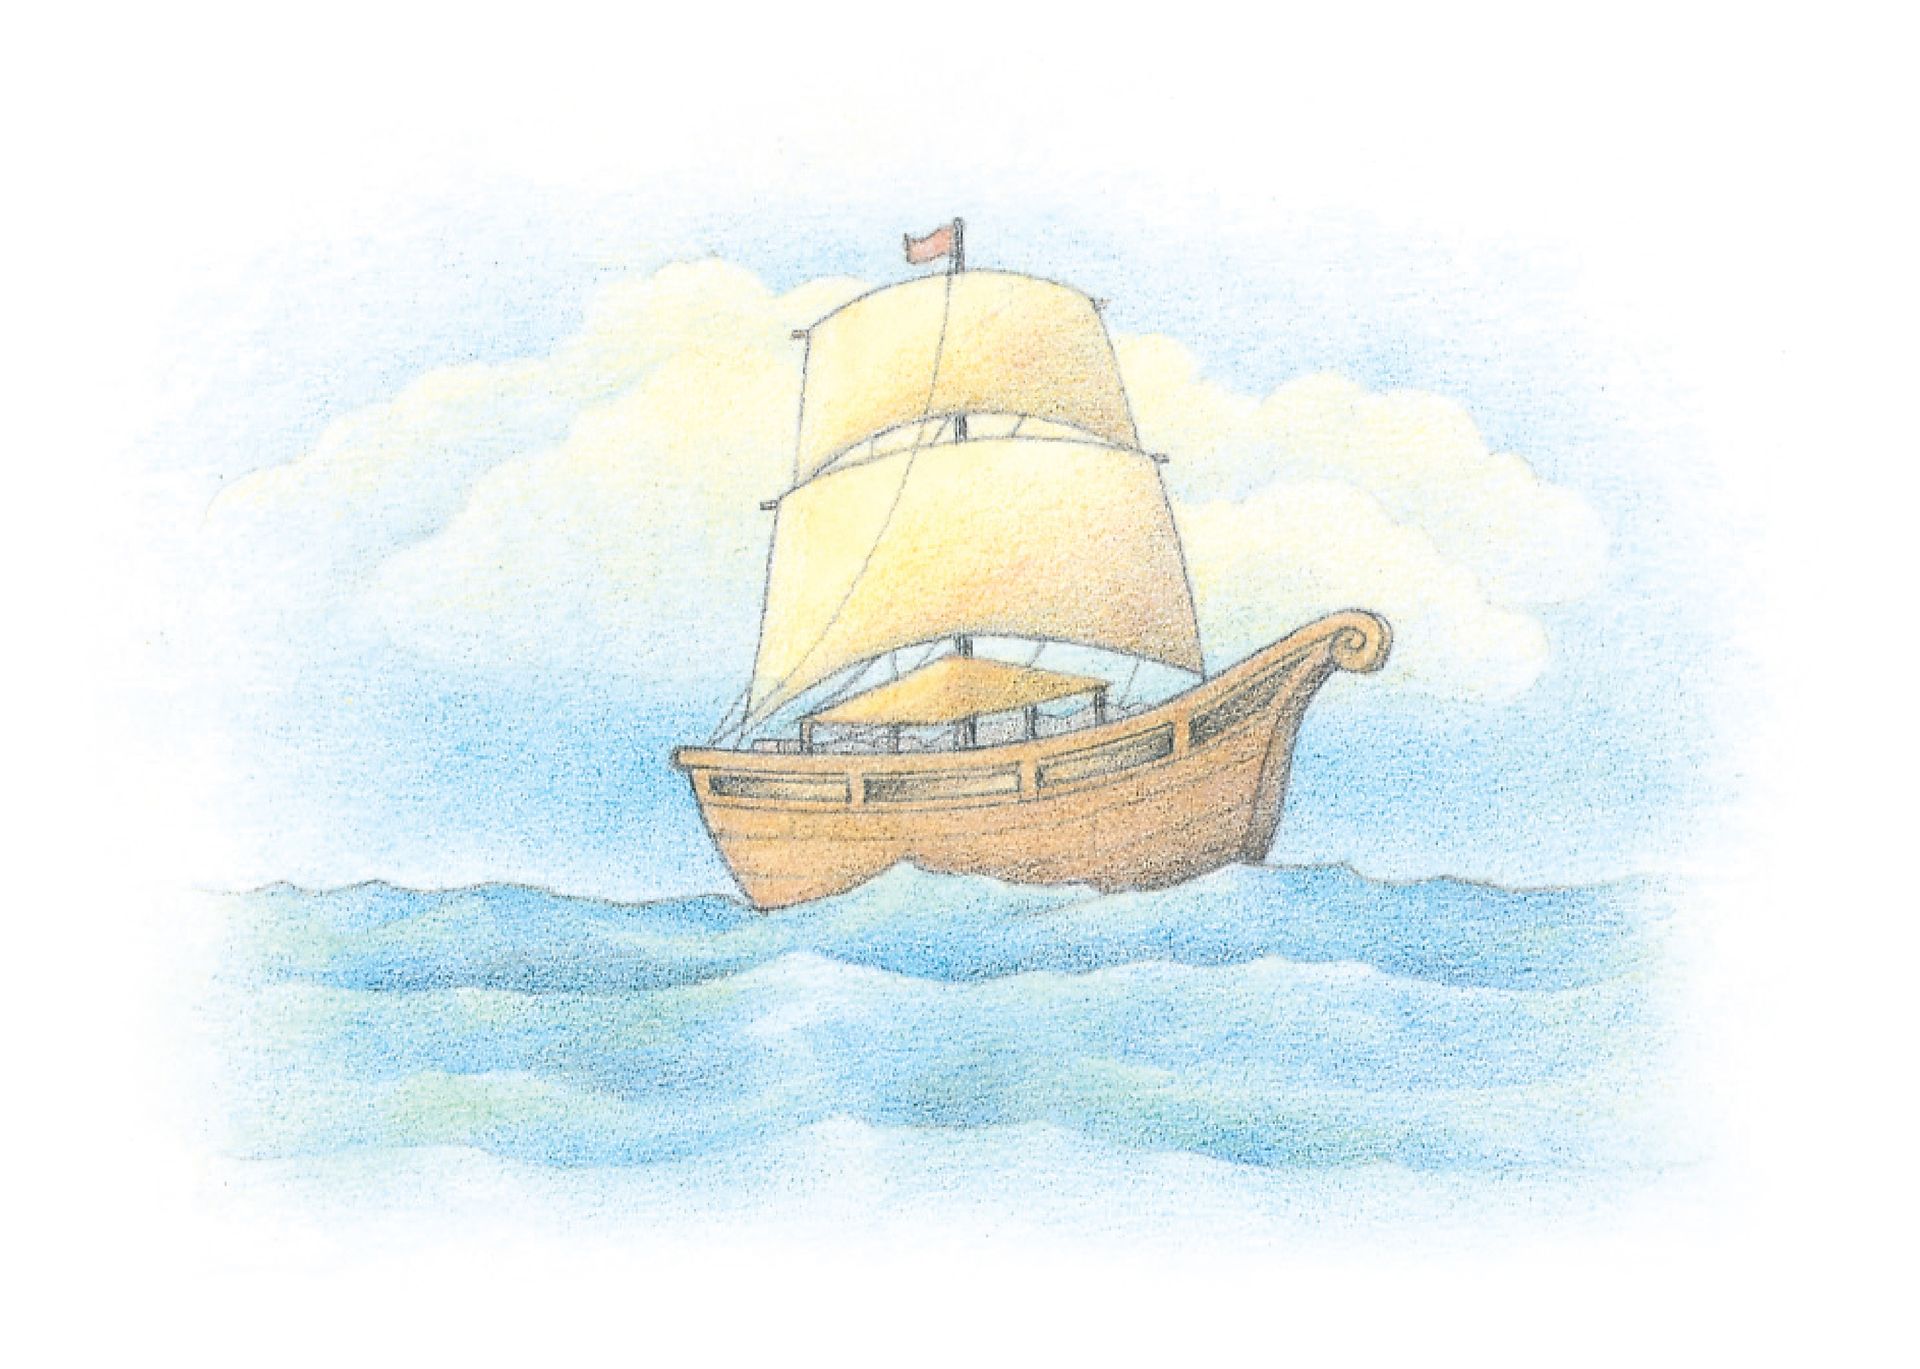 The ship that Nephi built and used to sail his family to the promised land. From the Children’s Songbook, page 118, “Book of Mormon Stories”; watercolor illustration by Beth Whittaker.